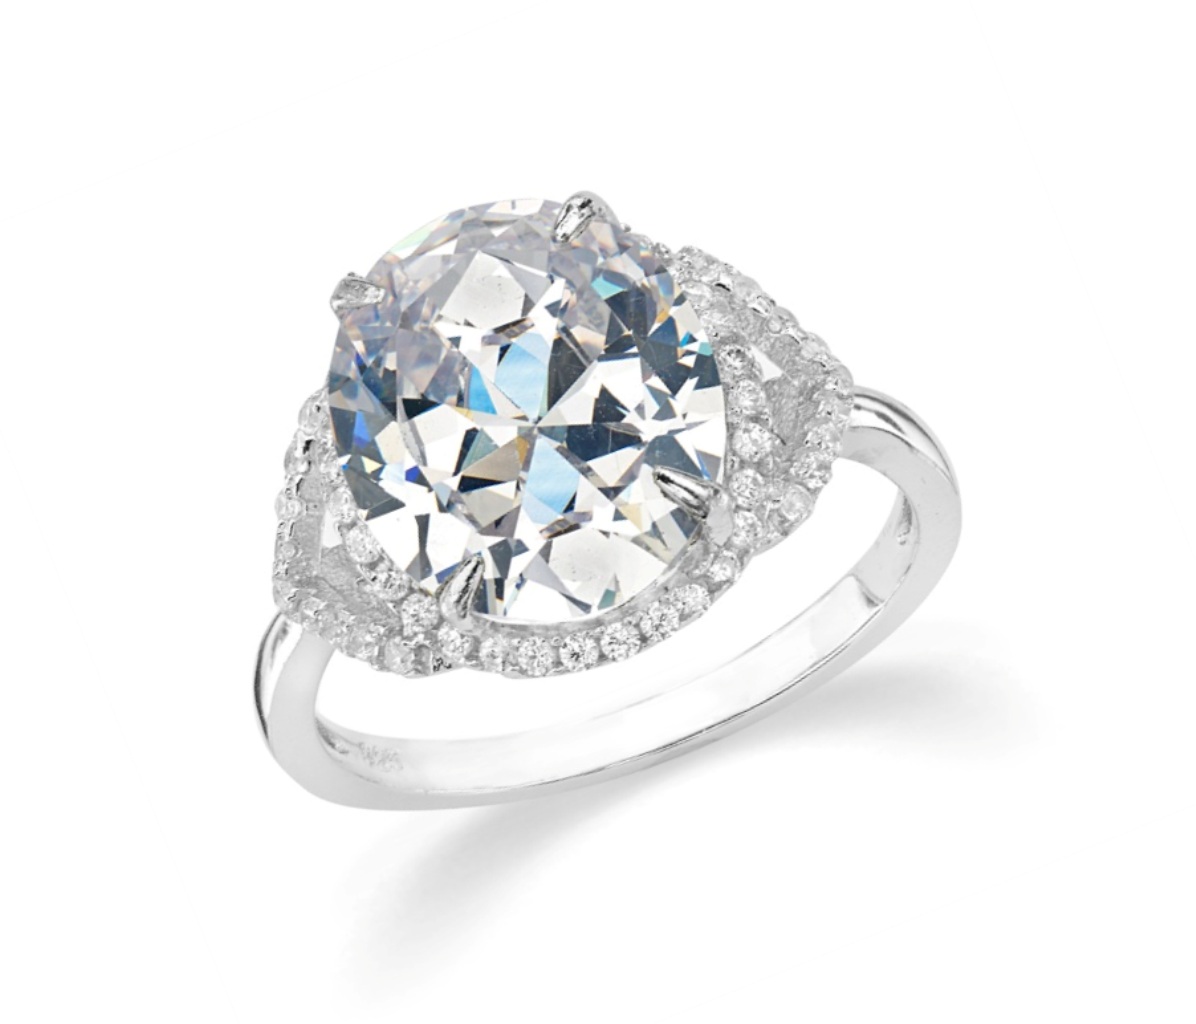 Clear CZ Oval Design Ring, Rhodium Plated Sterling Silver